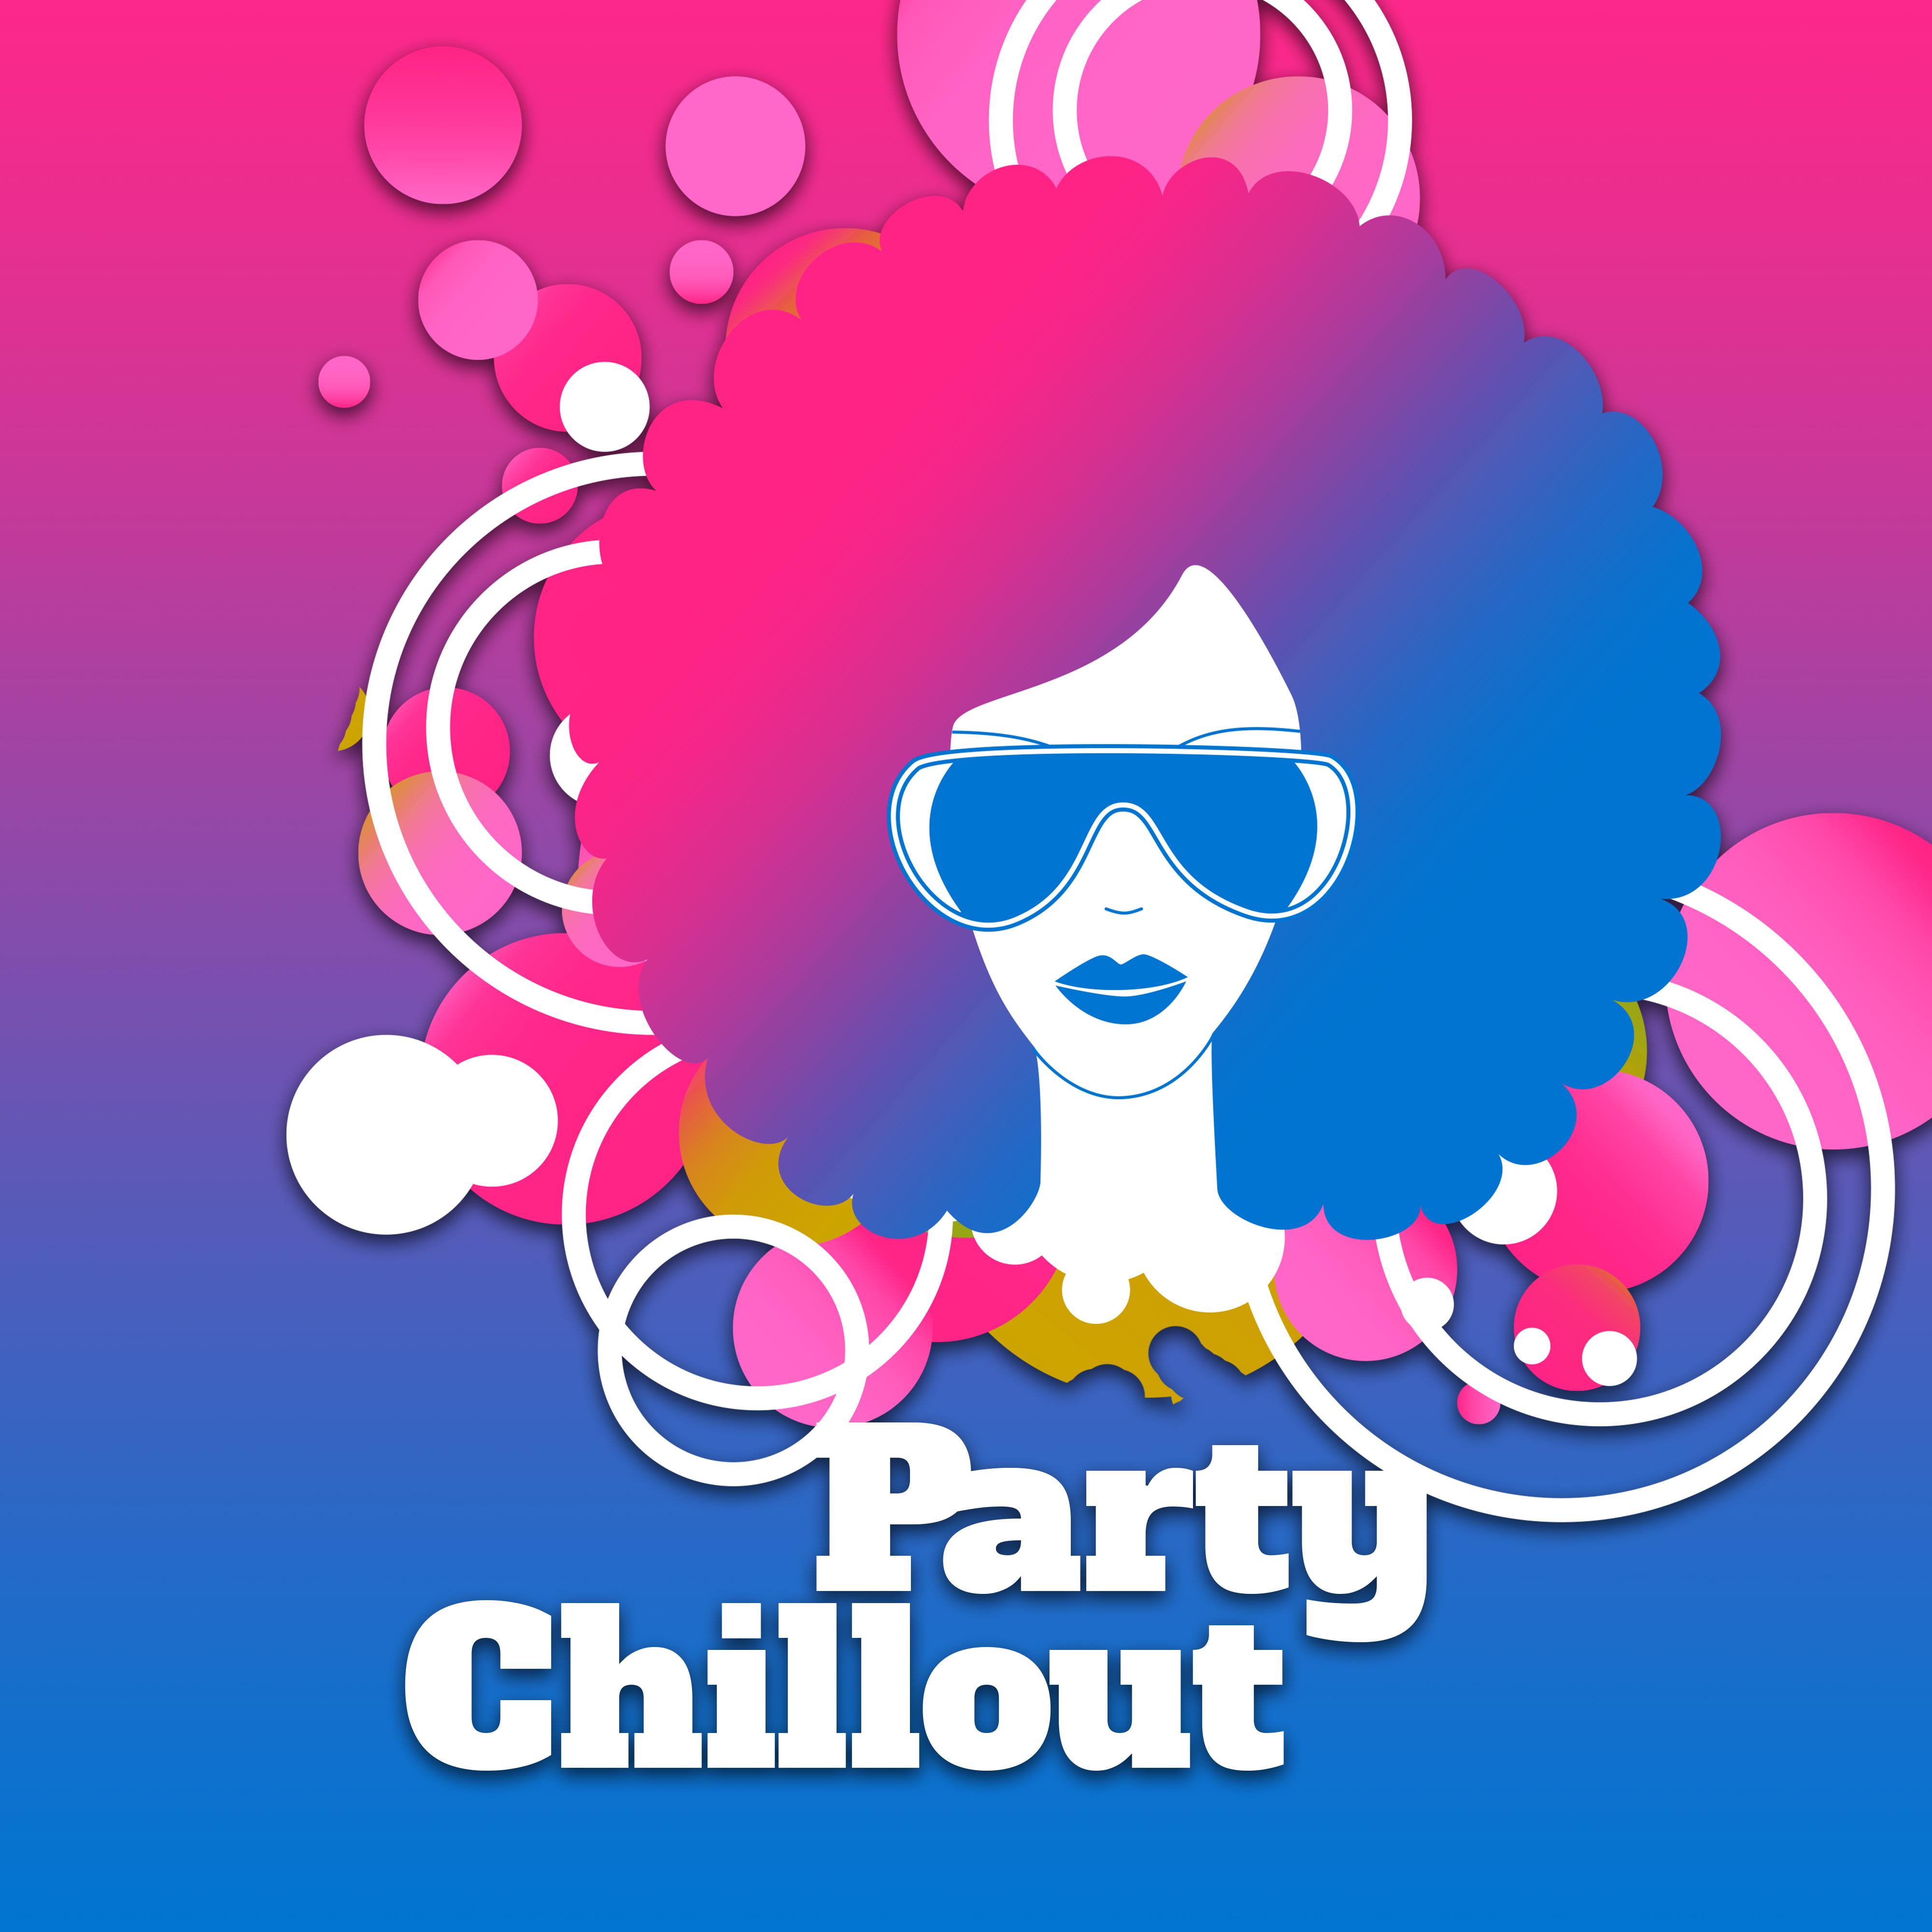 Party Chillout  Vibes, Cool Summer Time, Beach Music, Chill Paradise, Erotic Dance, Hot Party Ibiza